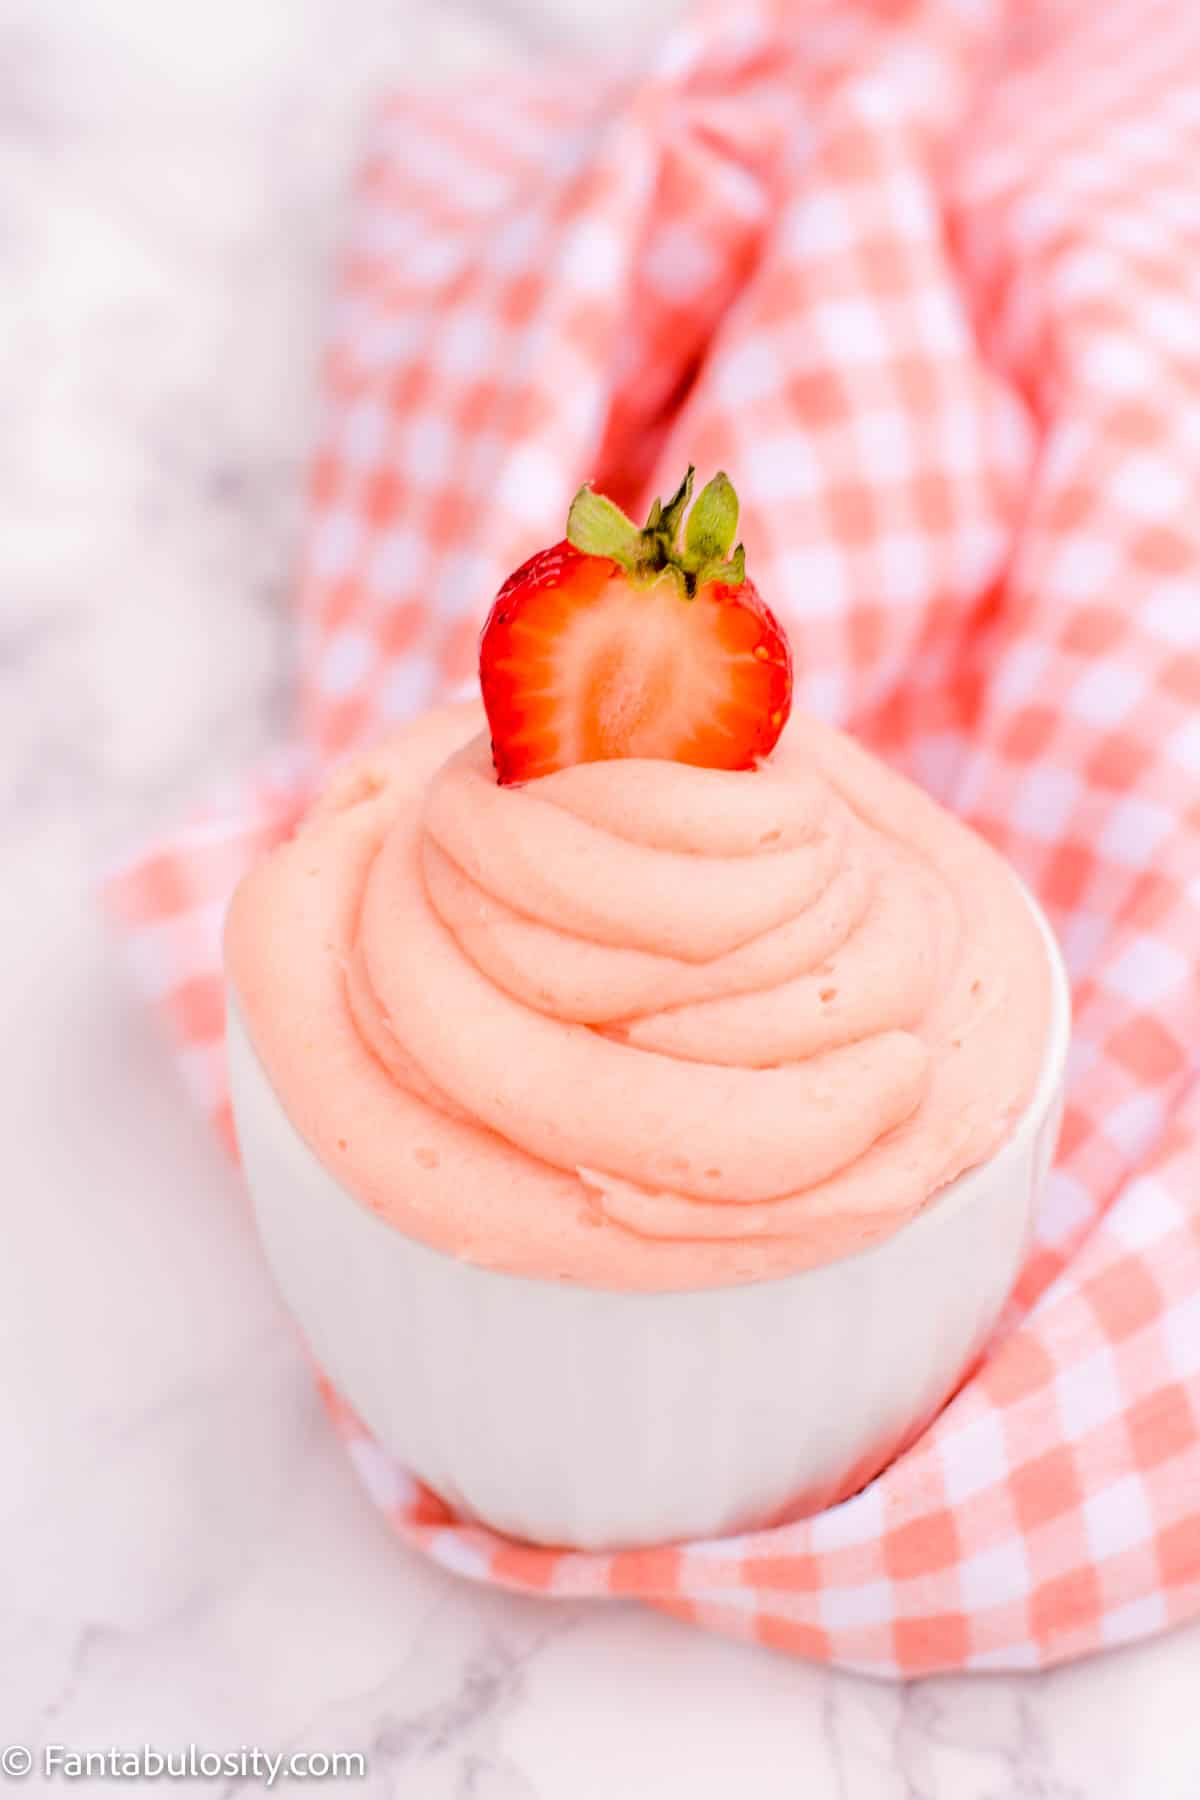 Strawberry Buttercream frosting